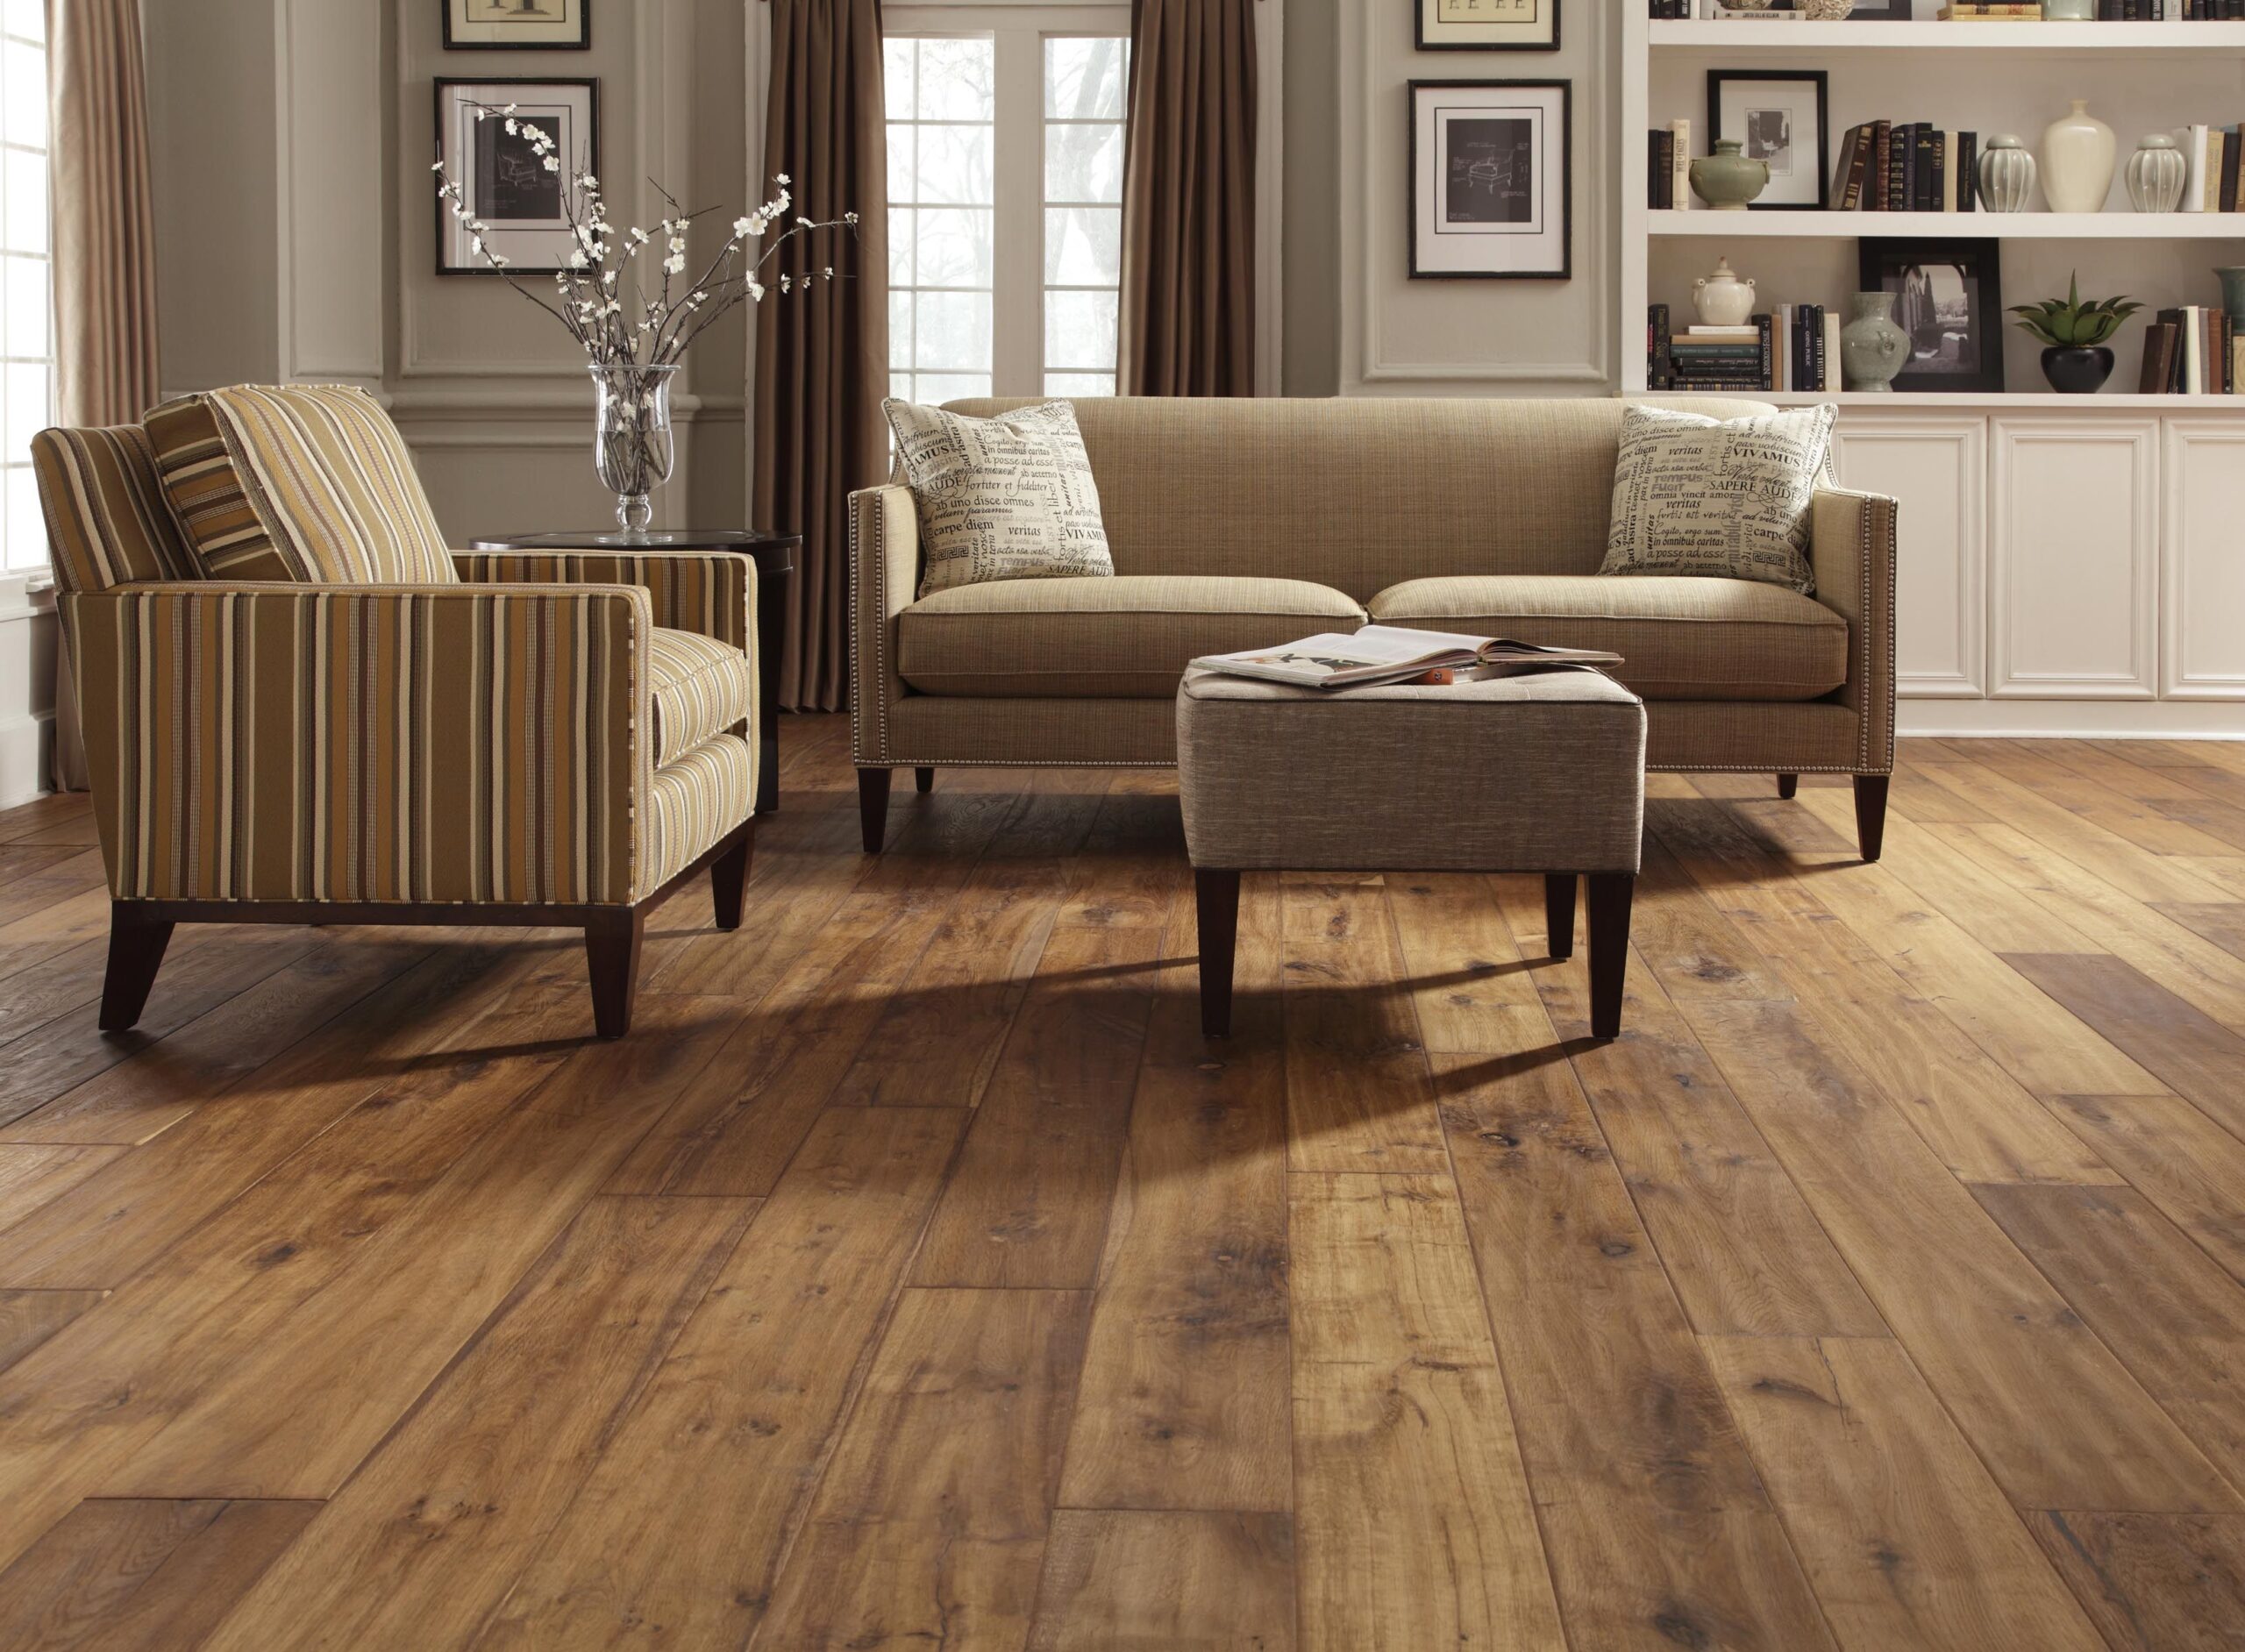 5 Best Laminate Flooring Colours For, What Is The Best Laminate Wood Flooring